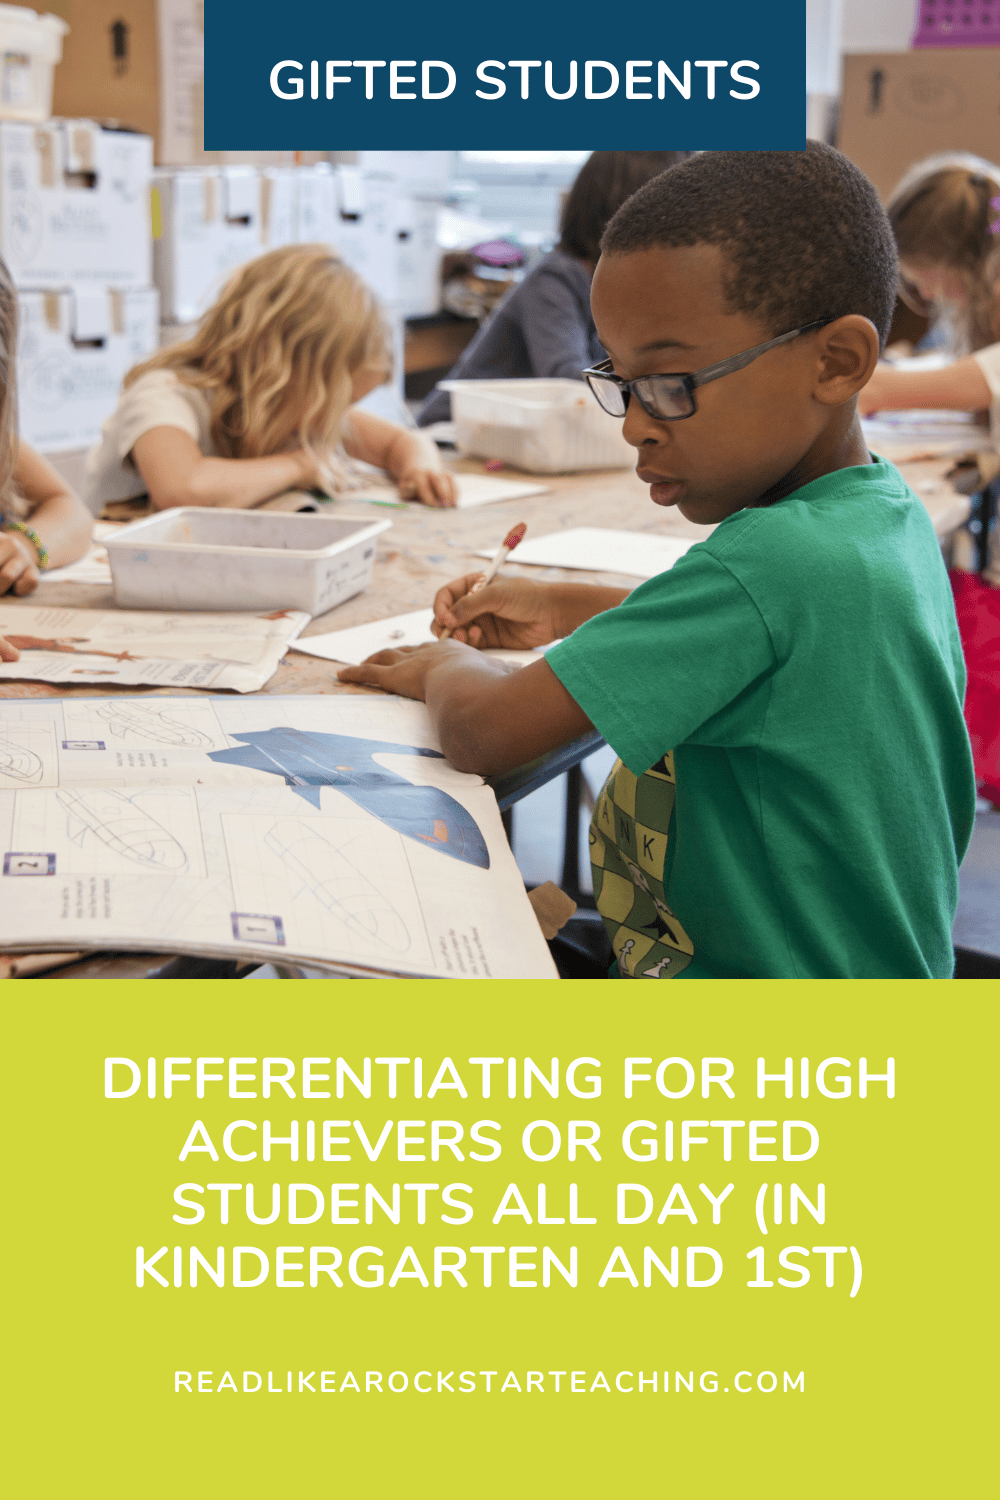 Differentiated Instruction for Gifted Students | Houghton Mifflin Harcourt